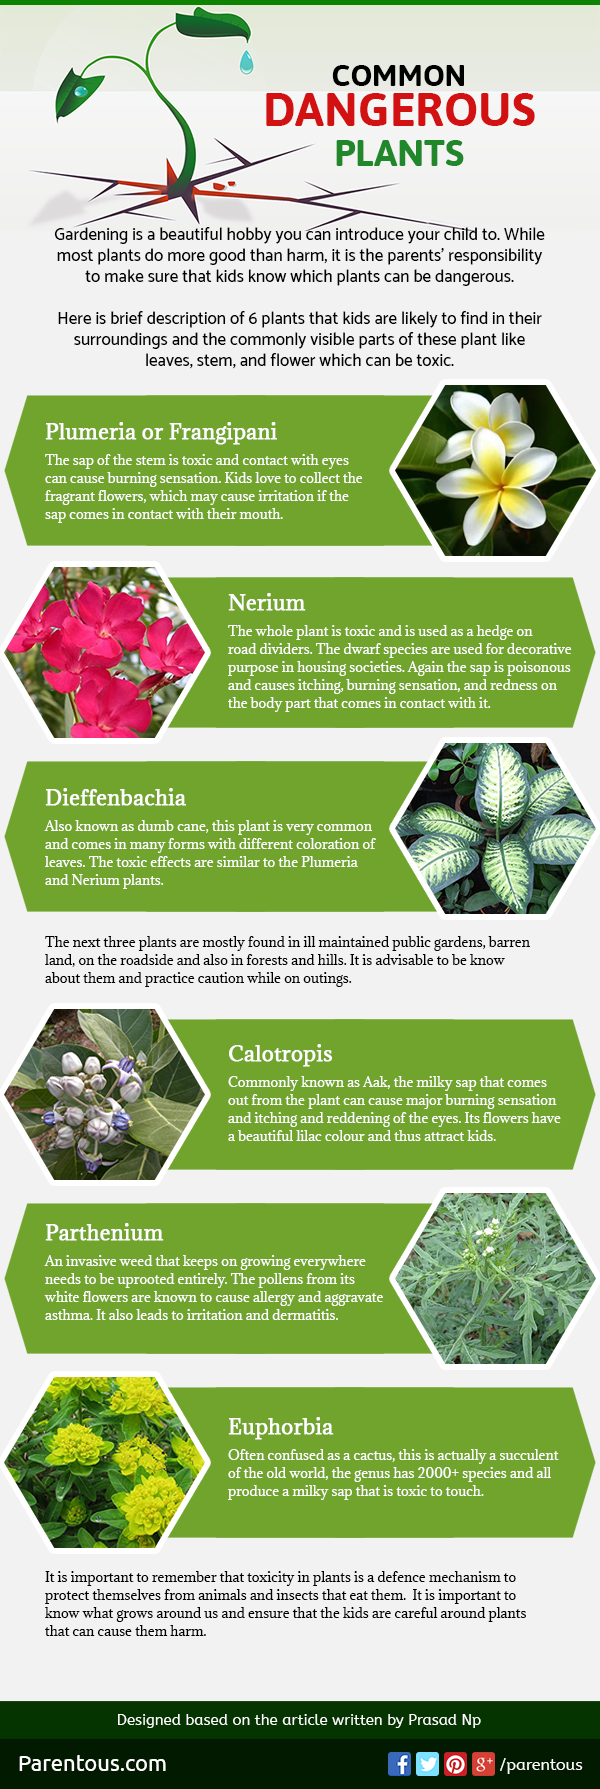 Know More About Common Dangerous Plants - Infographic